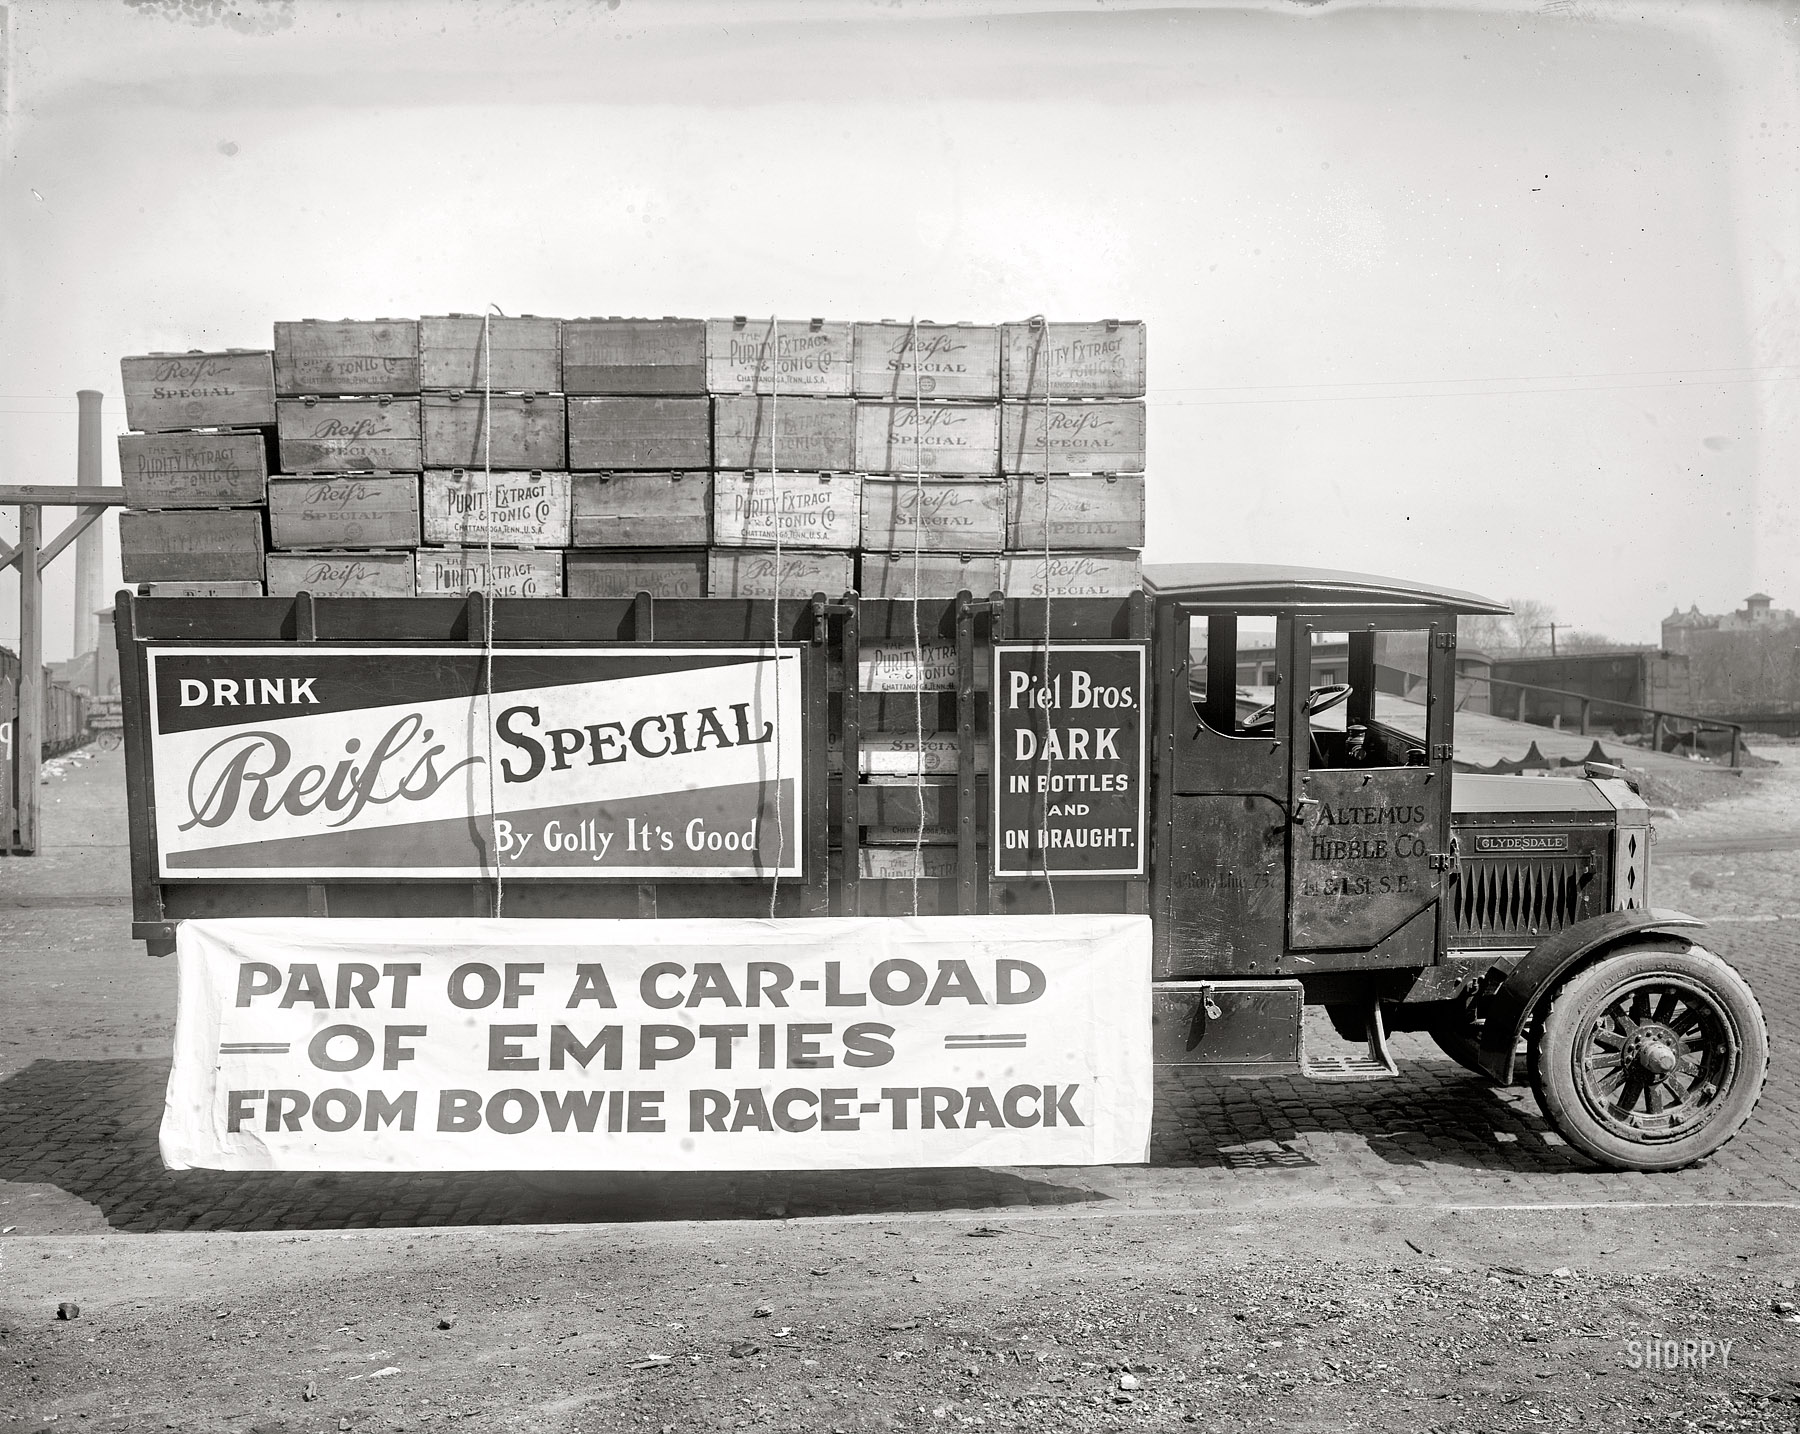 Washington, D.C., circa 1920. "Altemus-Hibble truck." Reif's, a "pure liquid food" touted as "the peer of soft drinks," was "the hearty cereal beverage with flavor and tang." National Photo Company Collection glass negative. View full size.